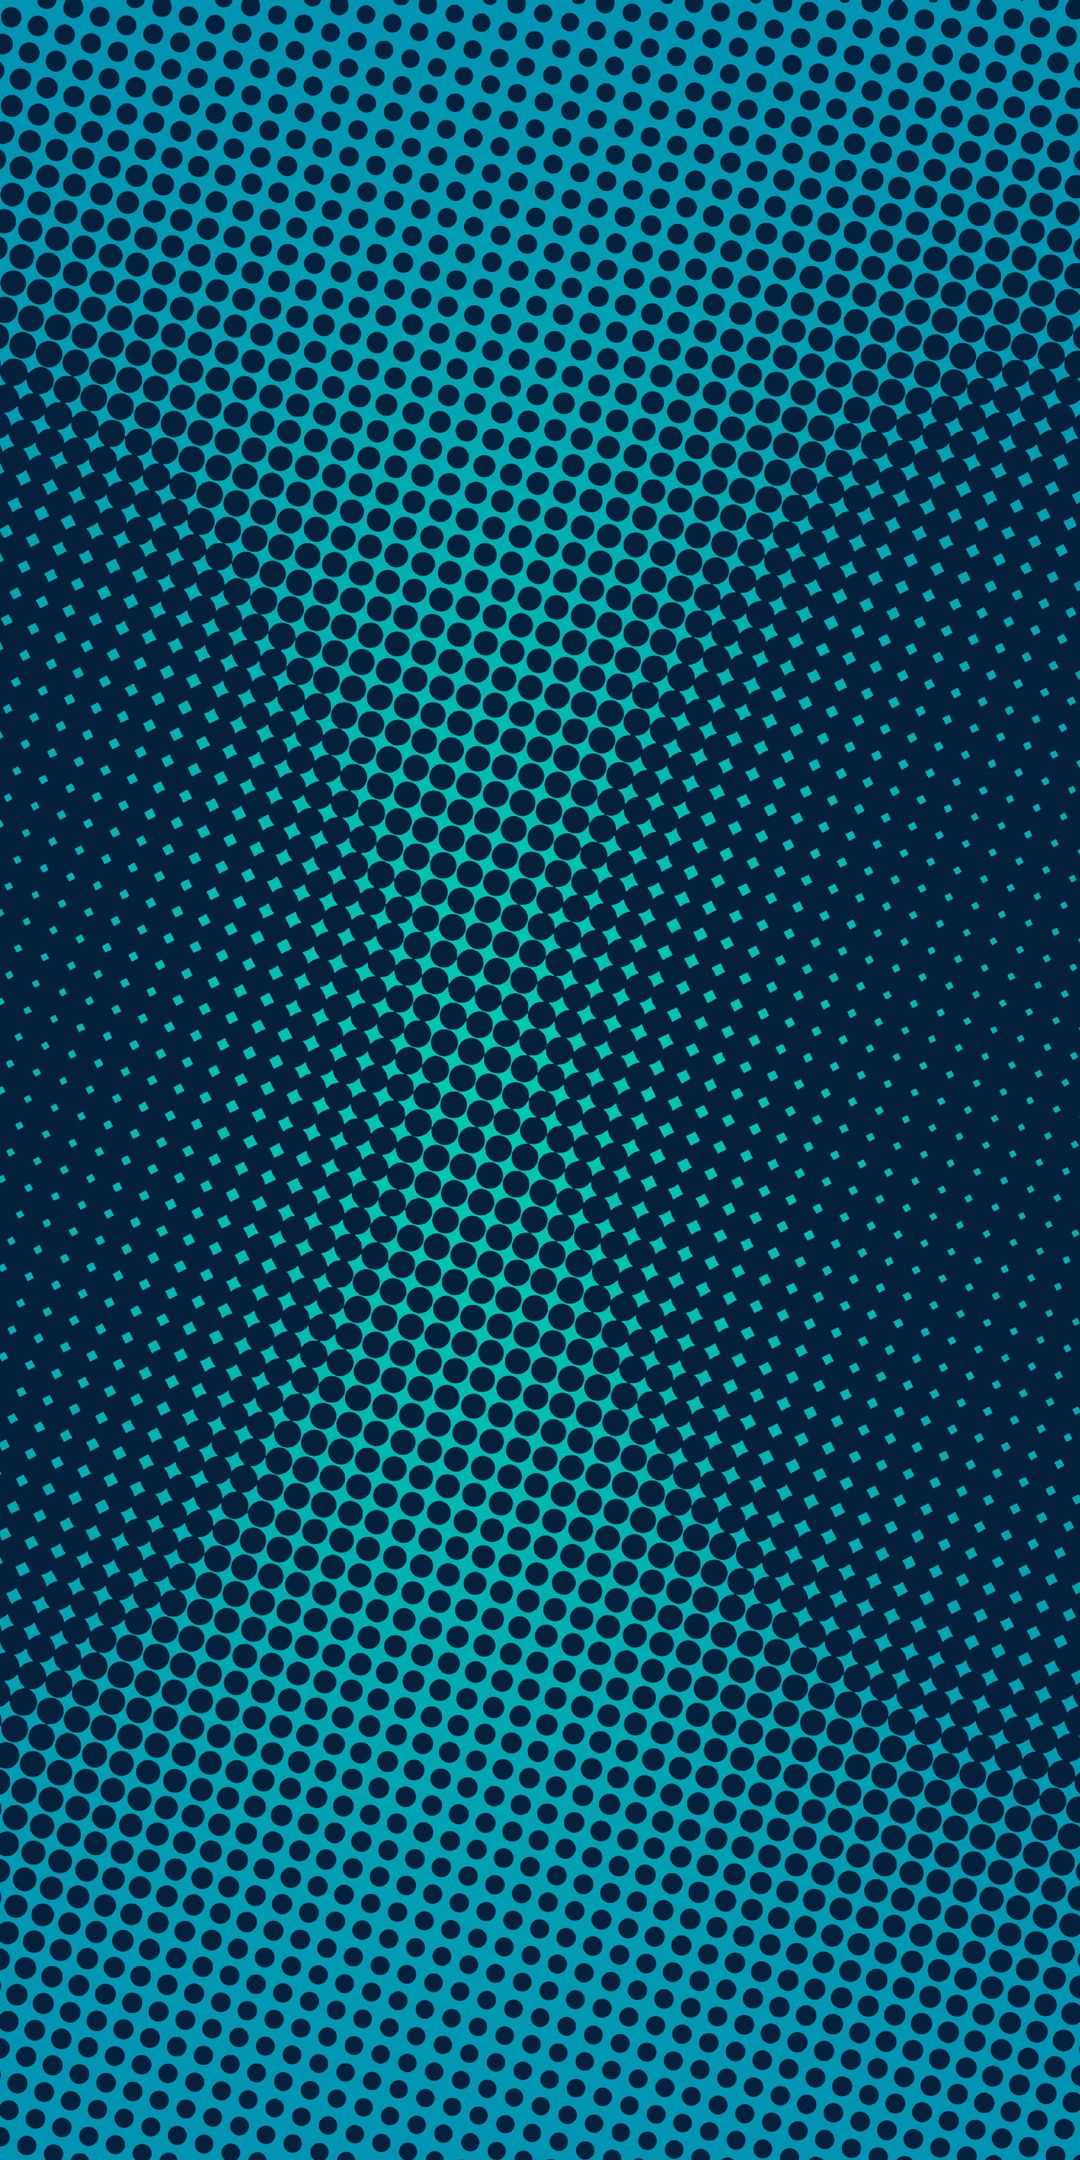 Carbon Fiber Iphone Wallpapers Kolpaper Awesome Free Hd Wallpapers